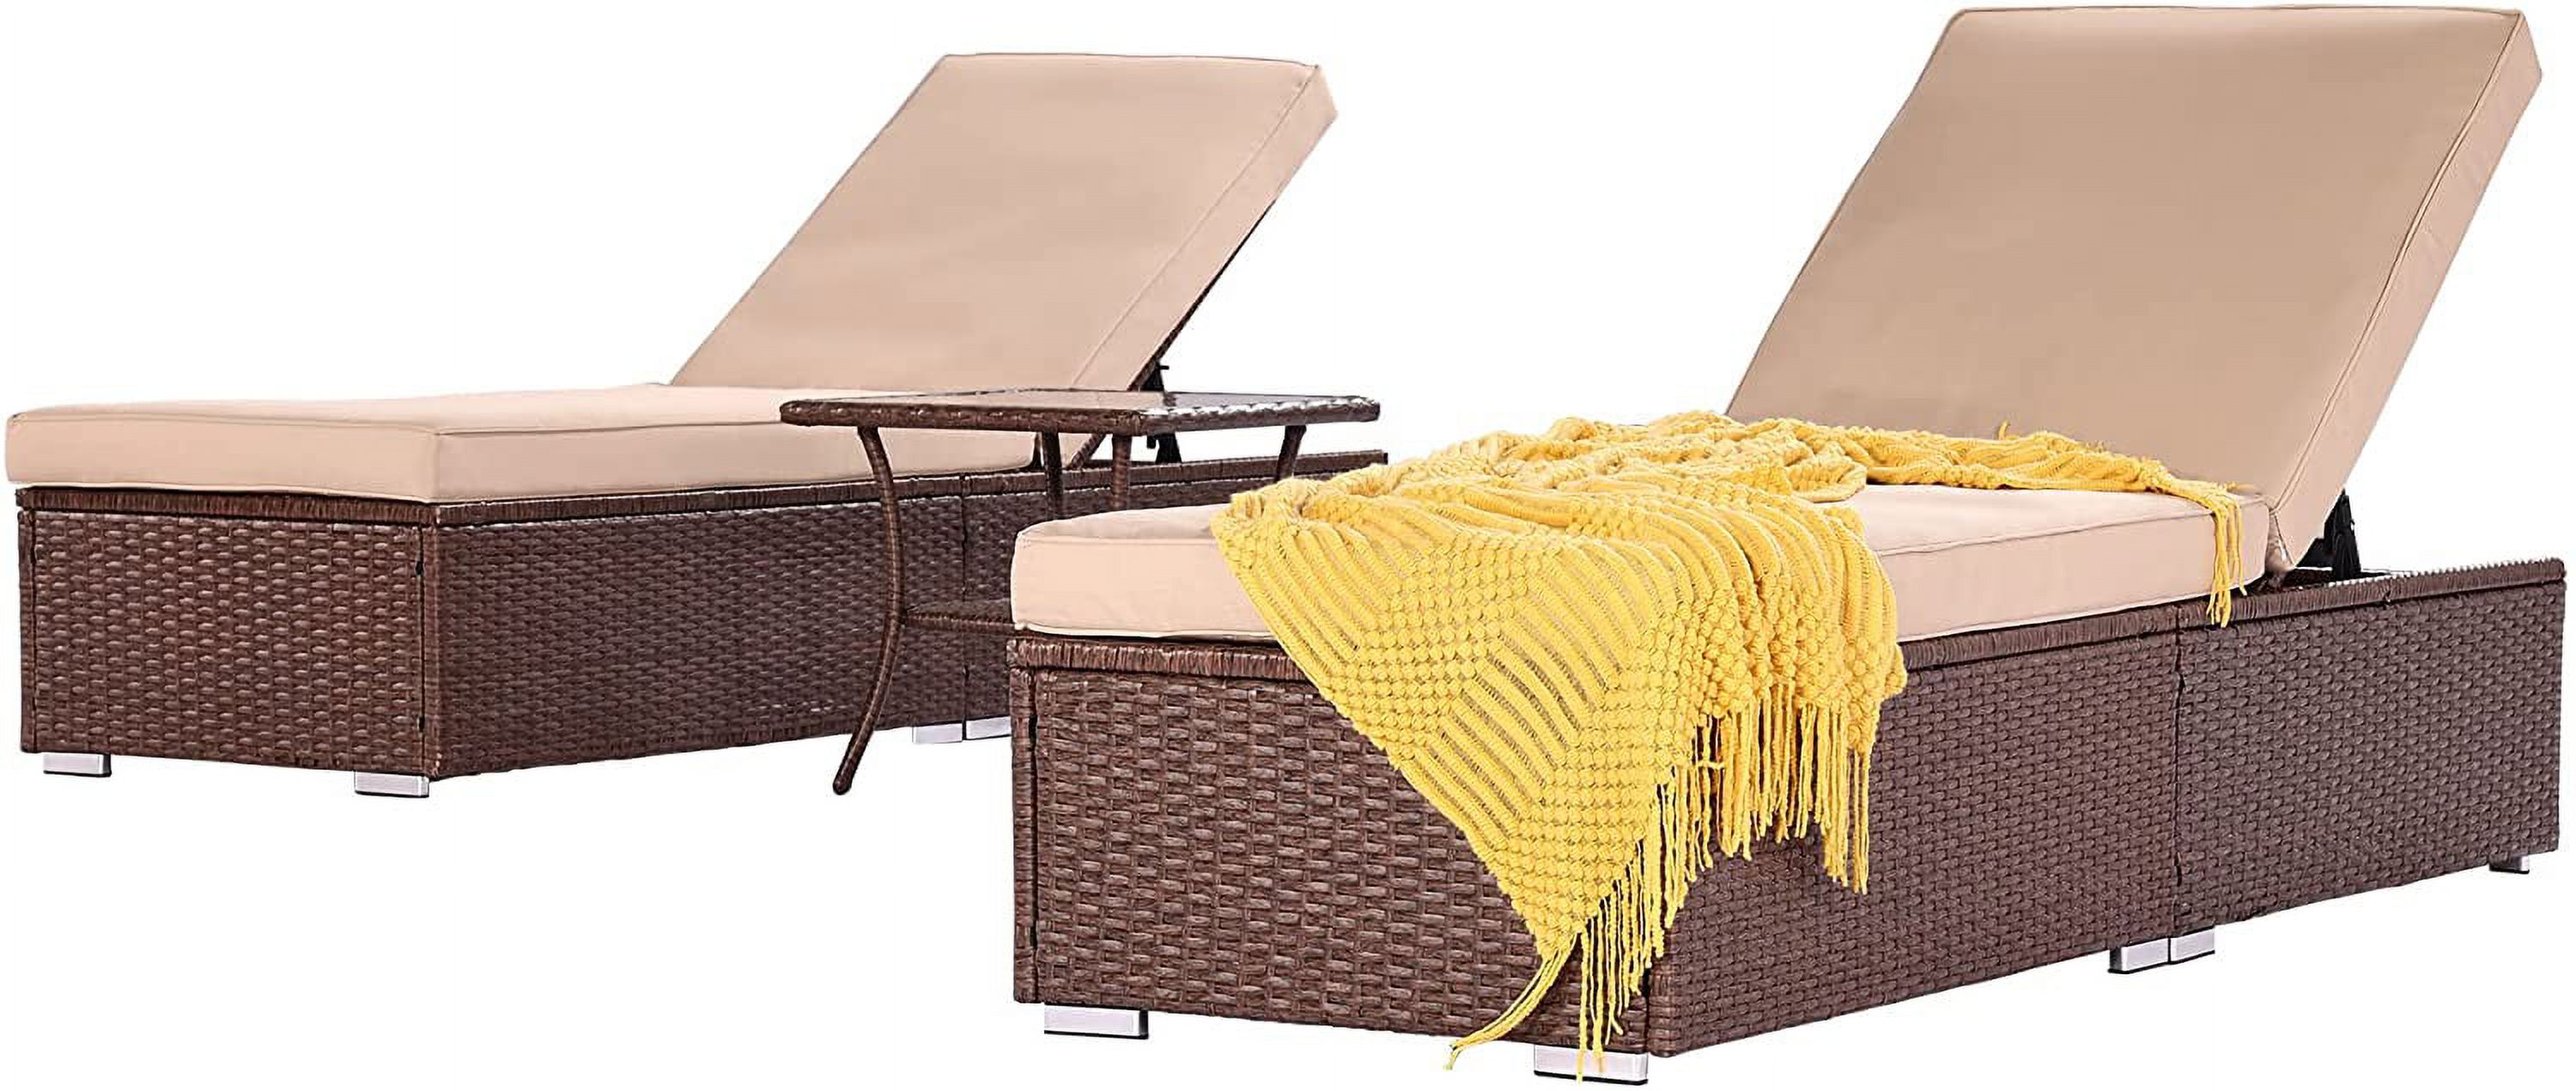 Royalcraft 2 Pieces Outdoor Chaise Lounge Chair, Brown Wicker Rattan Adjustable Patio Lounge Chair, Steel Frame with Removable Beige Cushions, for Poolside, Deck and Backyard - image 3 of 7